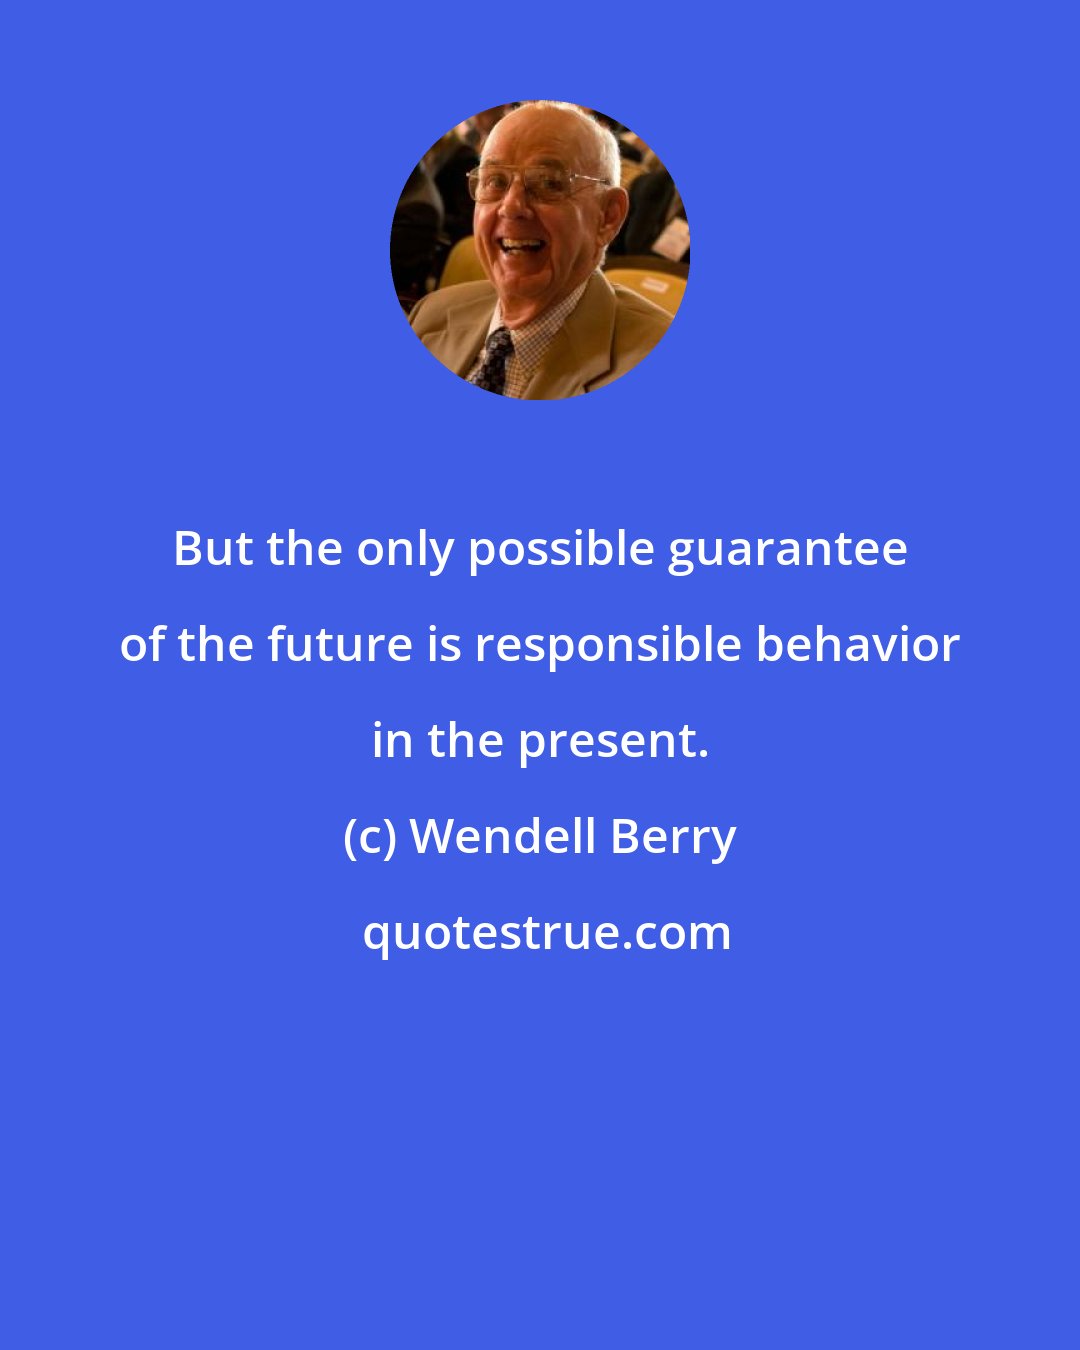 Wendell Berry: But the only possible guarantee of the future is responsible behavior in the present.